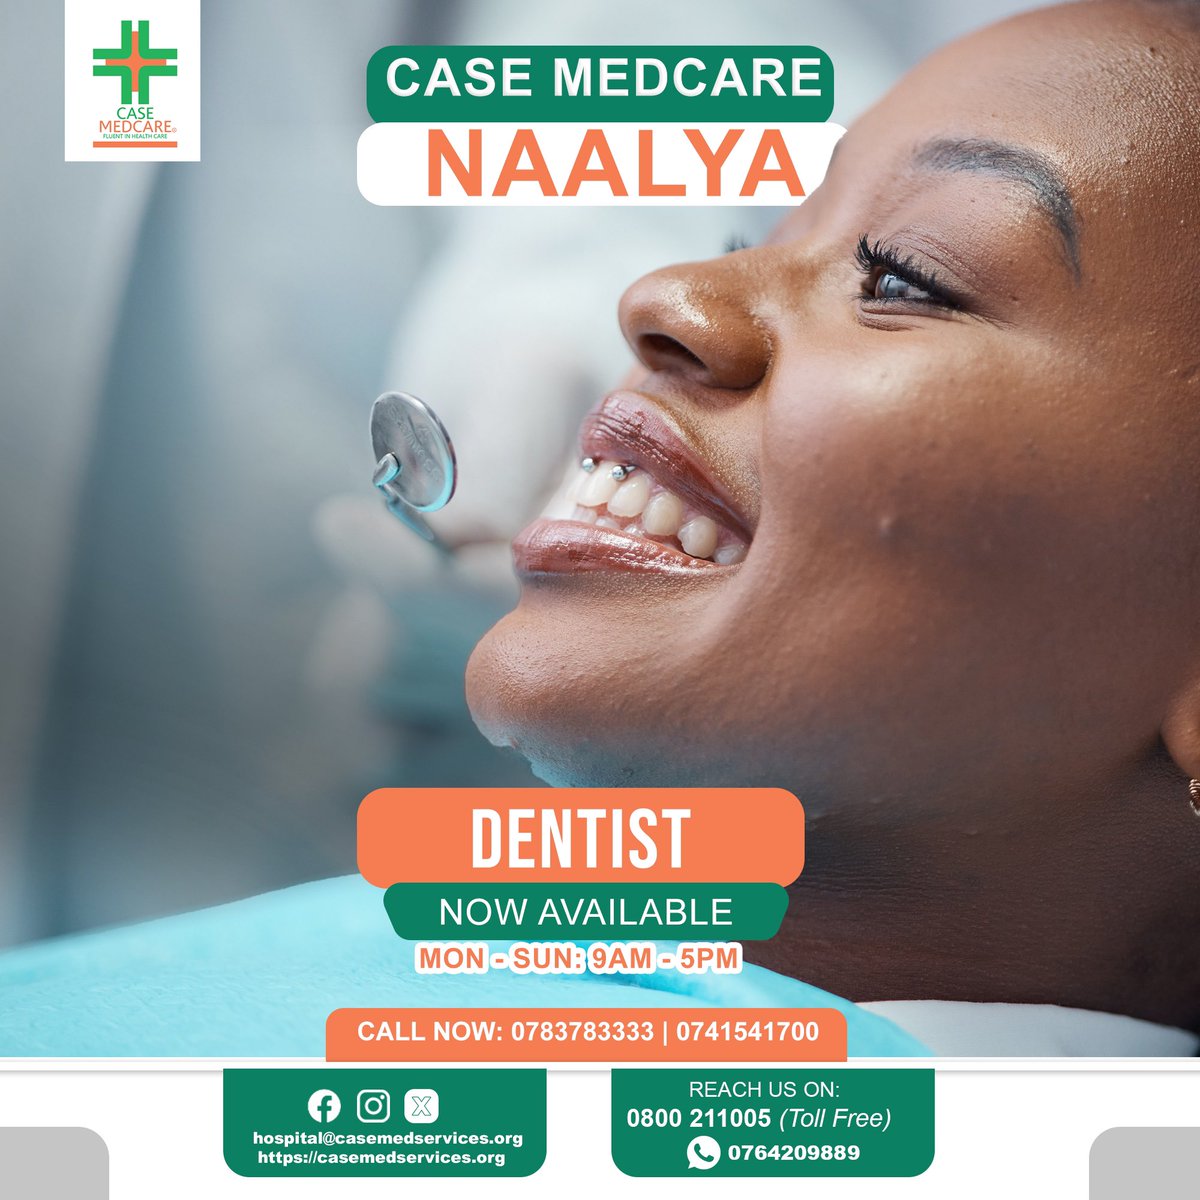 Dentist Now Available Daily at Case Medcare Naalya! Get premium dental care at Case Medcare Naalya with a quick turnaround time. Our dentists are available throughout the week to help you with any dental problem, including painful teeth, gums, or sensitivity when drinking cold…